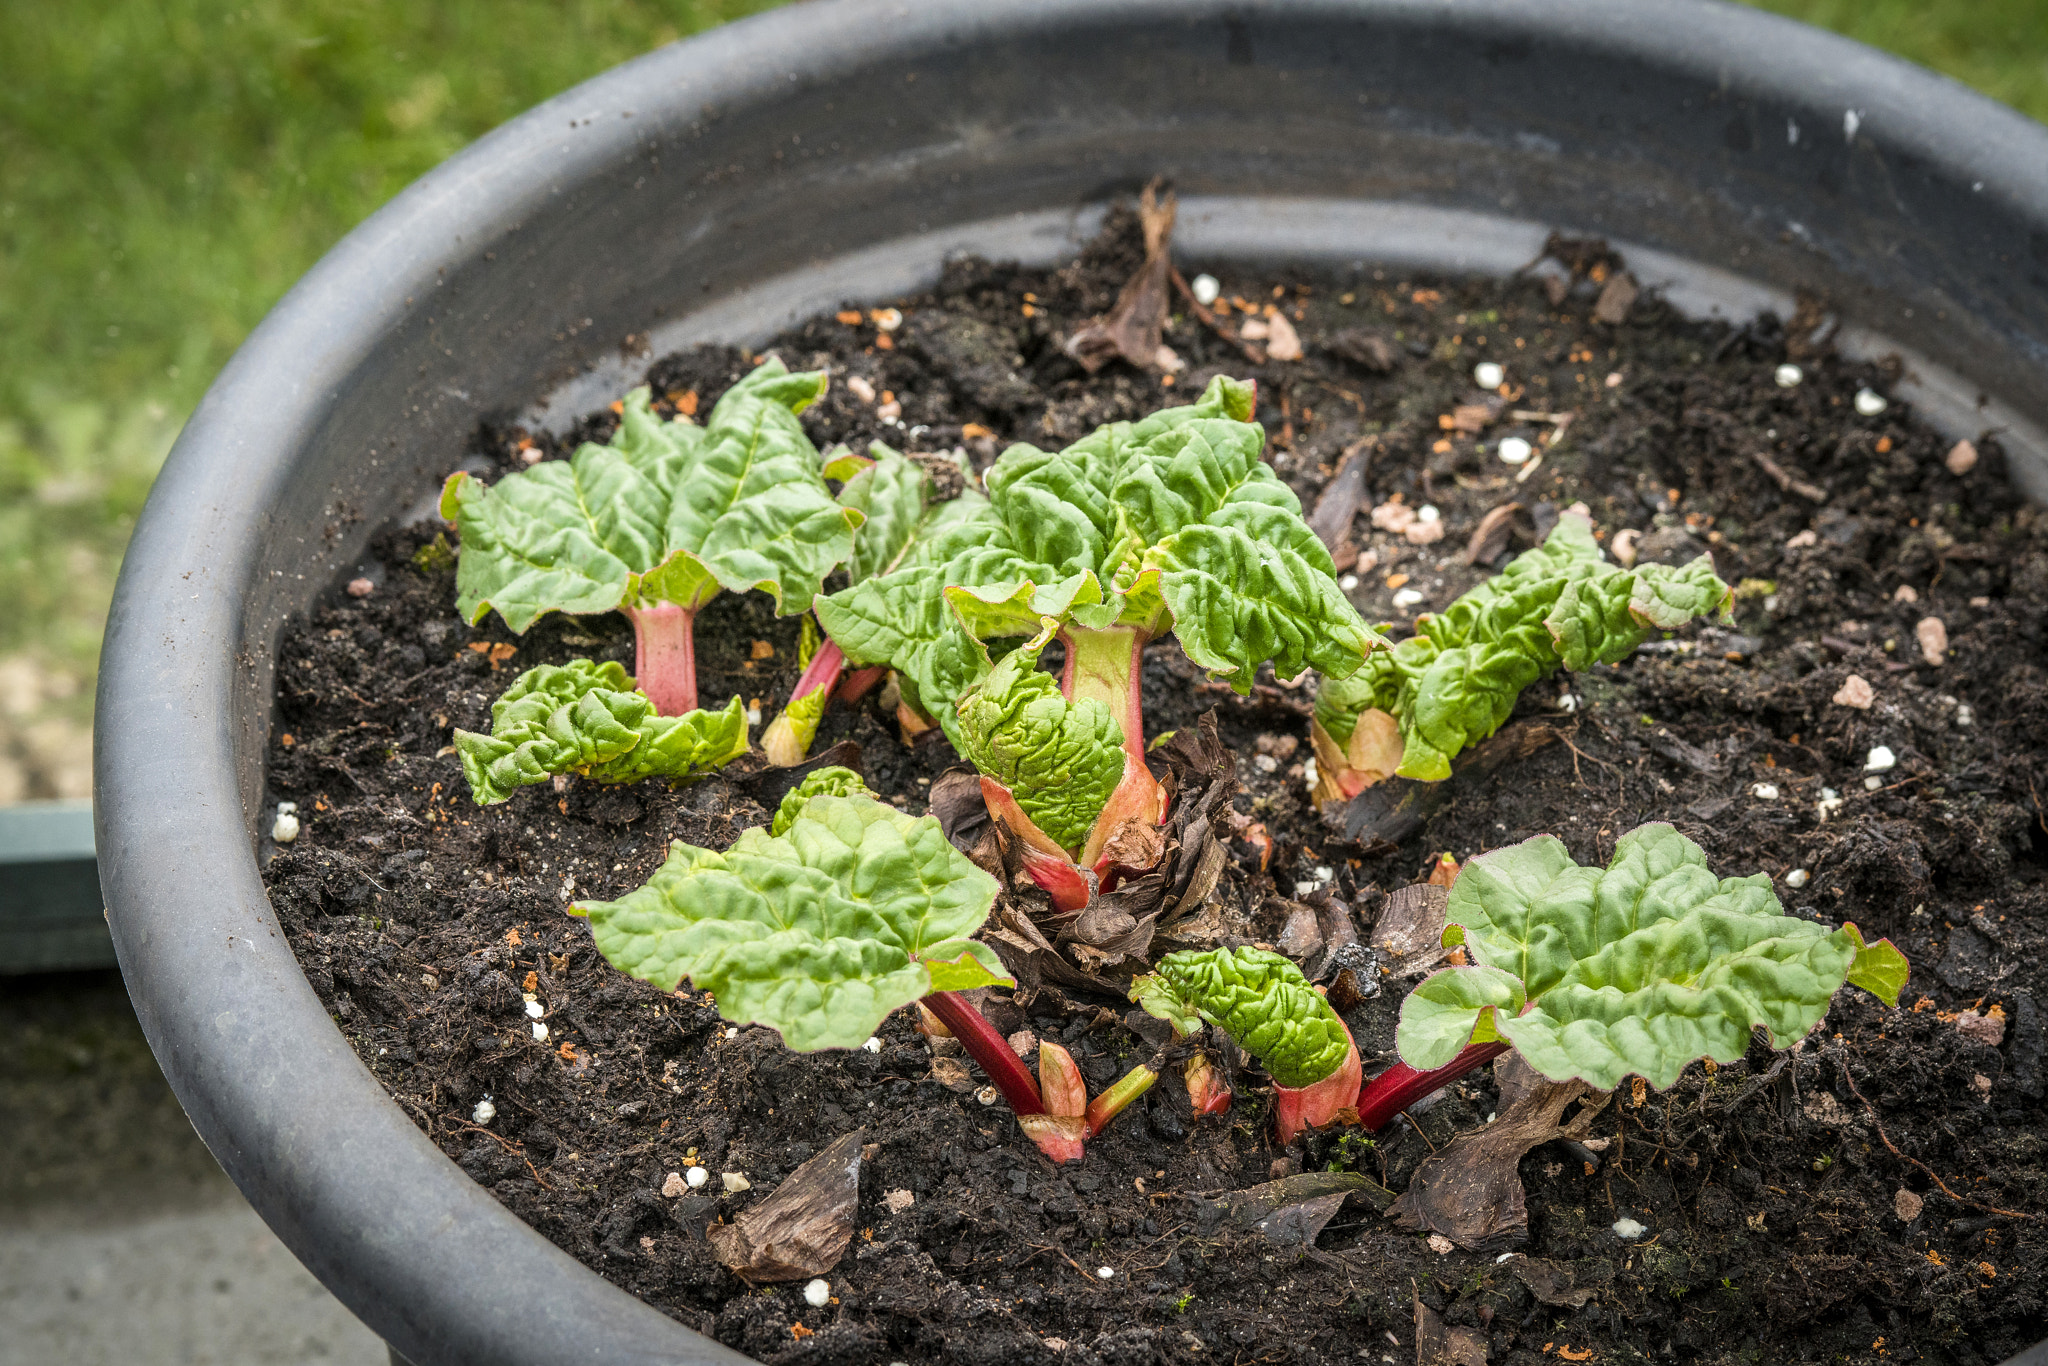 Sony a99 II + Sony 70-400mm F4-5.6 G SSM II sample photo. Rhubarb plant in the early stage photography